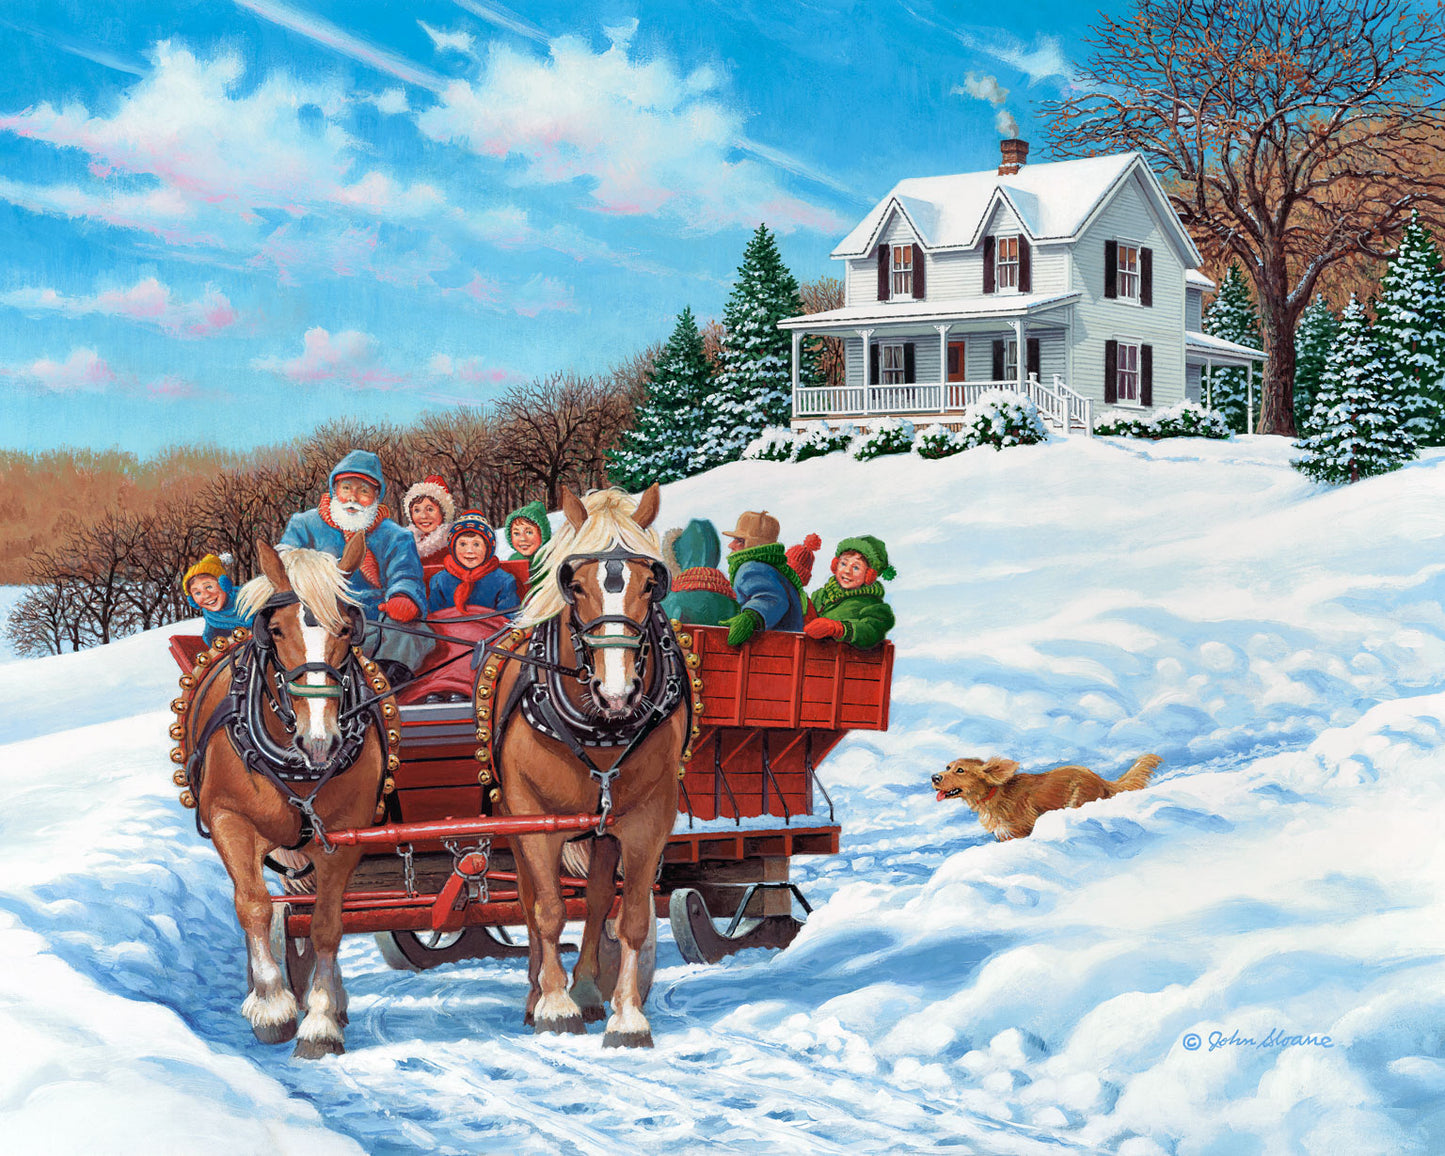 The More the Merrier - Puzzle by John Sloane